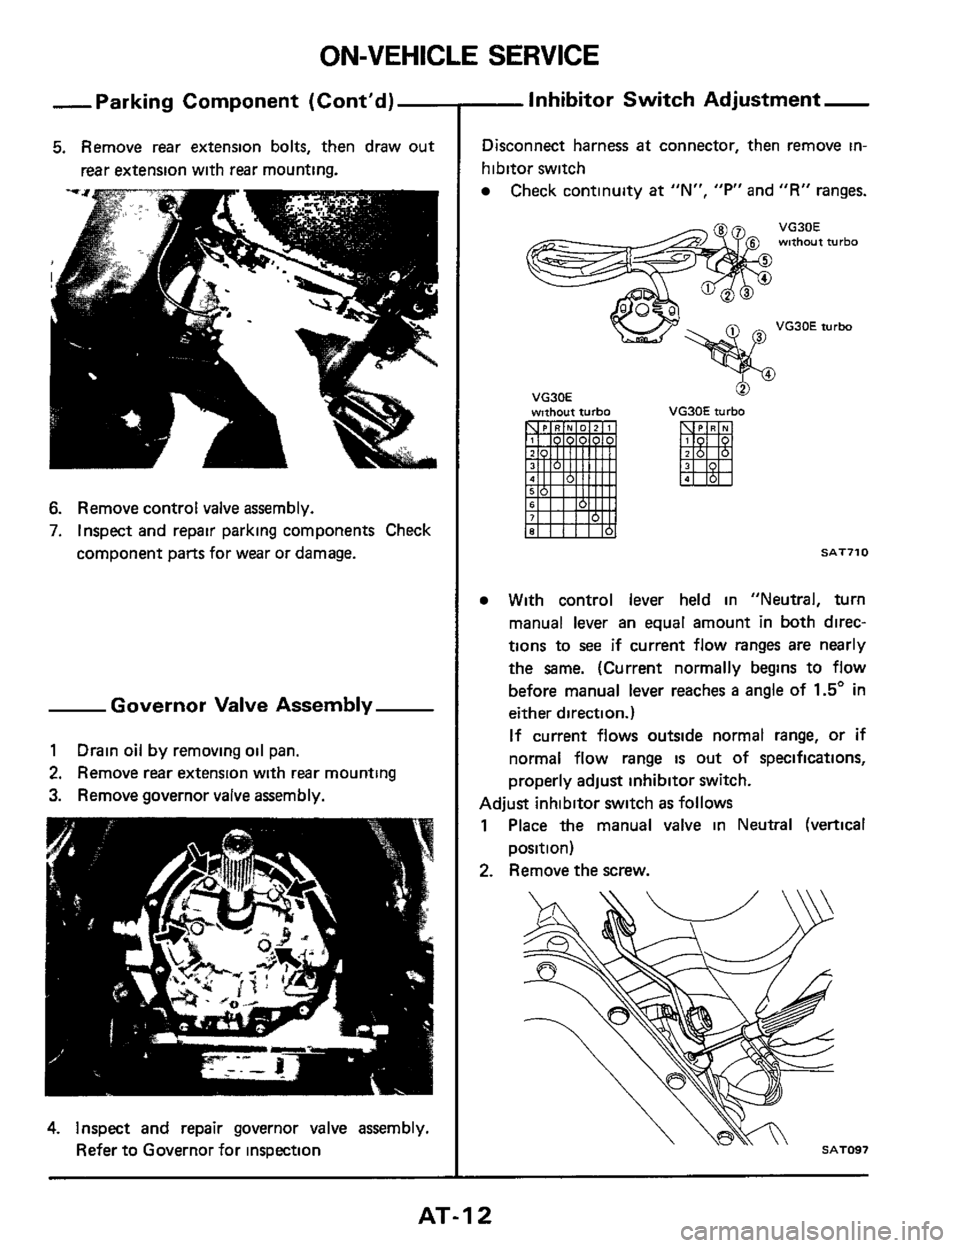 NISSAN 300ZX 1984 Z31 Automatic Transmission User Guide ~  ~~ ON-VEHICLE 
SERVICE 
-Parking  Component (Contd)- 
5. Remove  rear extension  bolts, then draw out 
rear extension  with rear mounting. 
6. Remove  control valve assembly. 
7. Inspect and repai